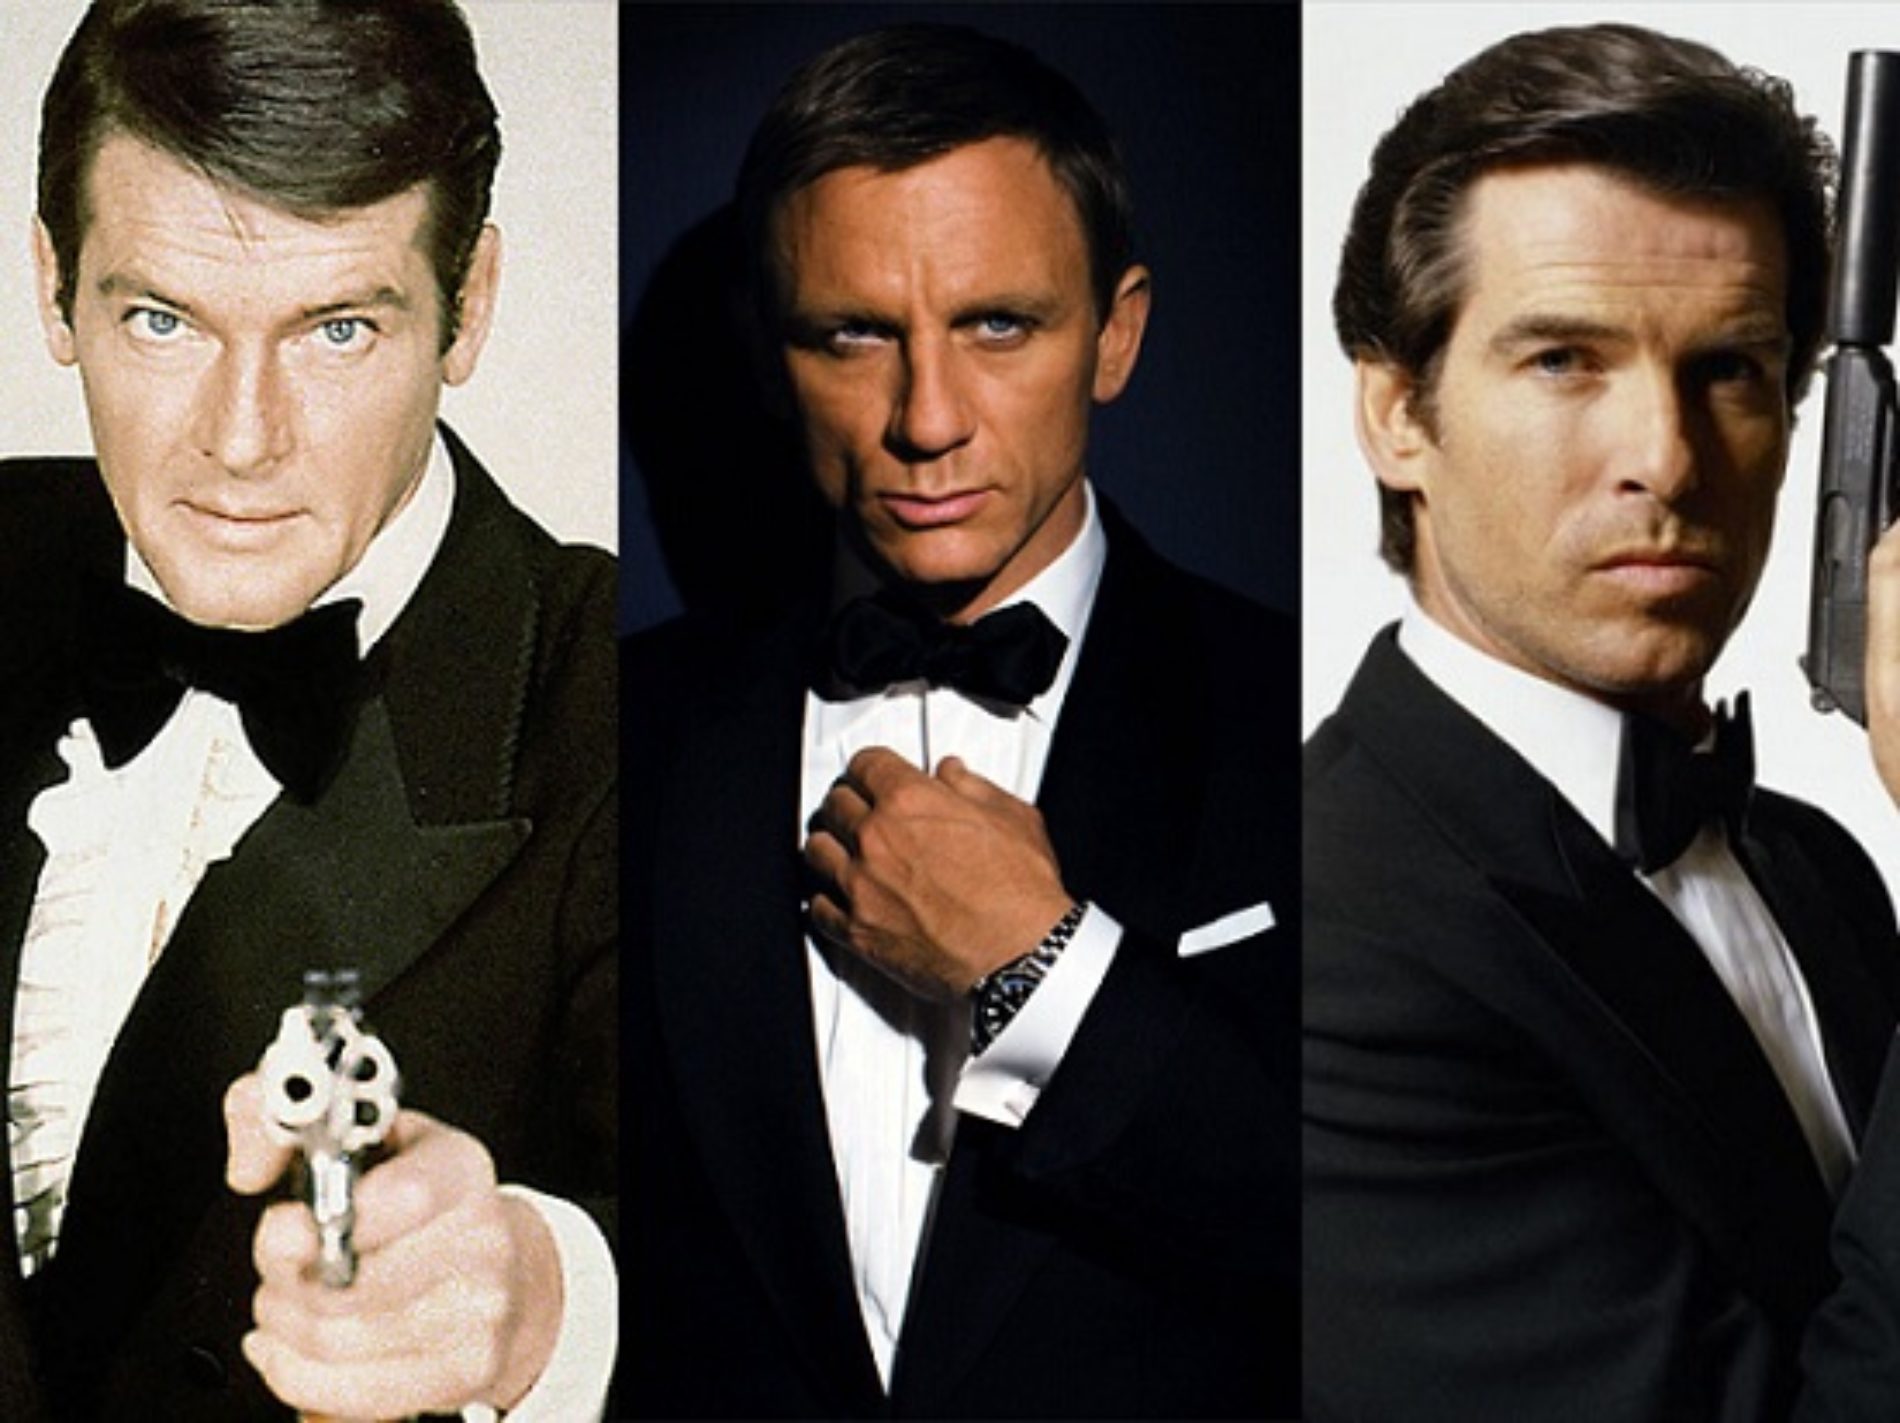 James Bond Can Never Be Gay, Says Roger Moore